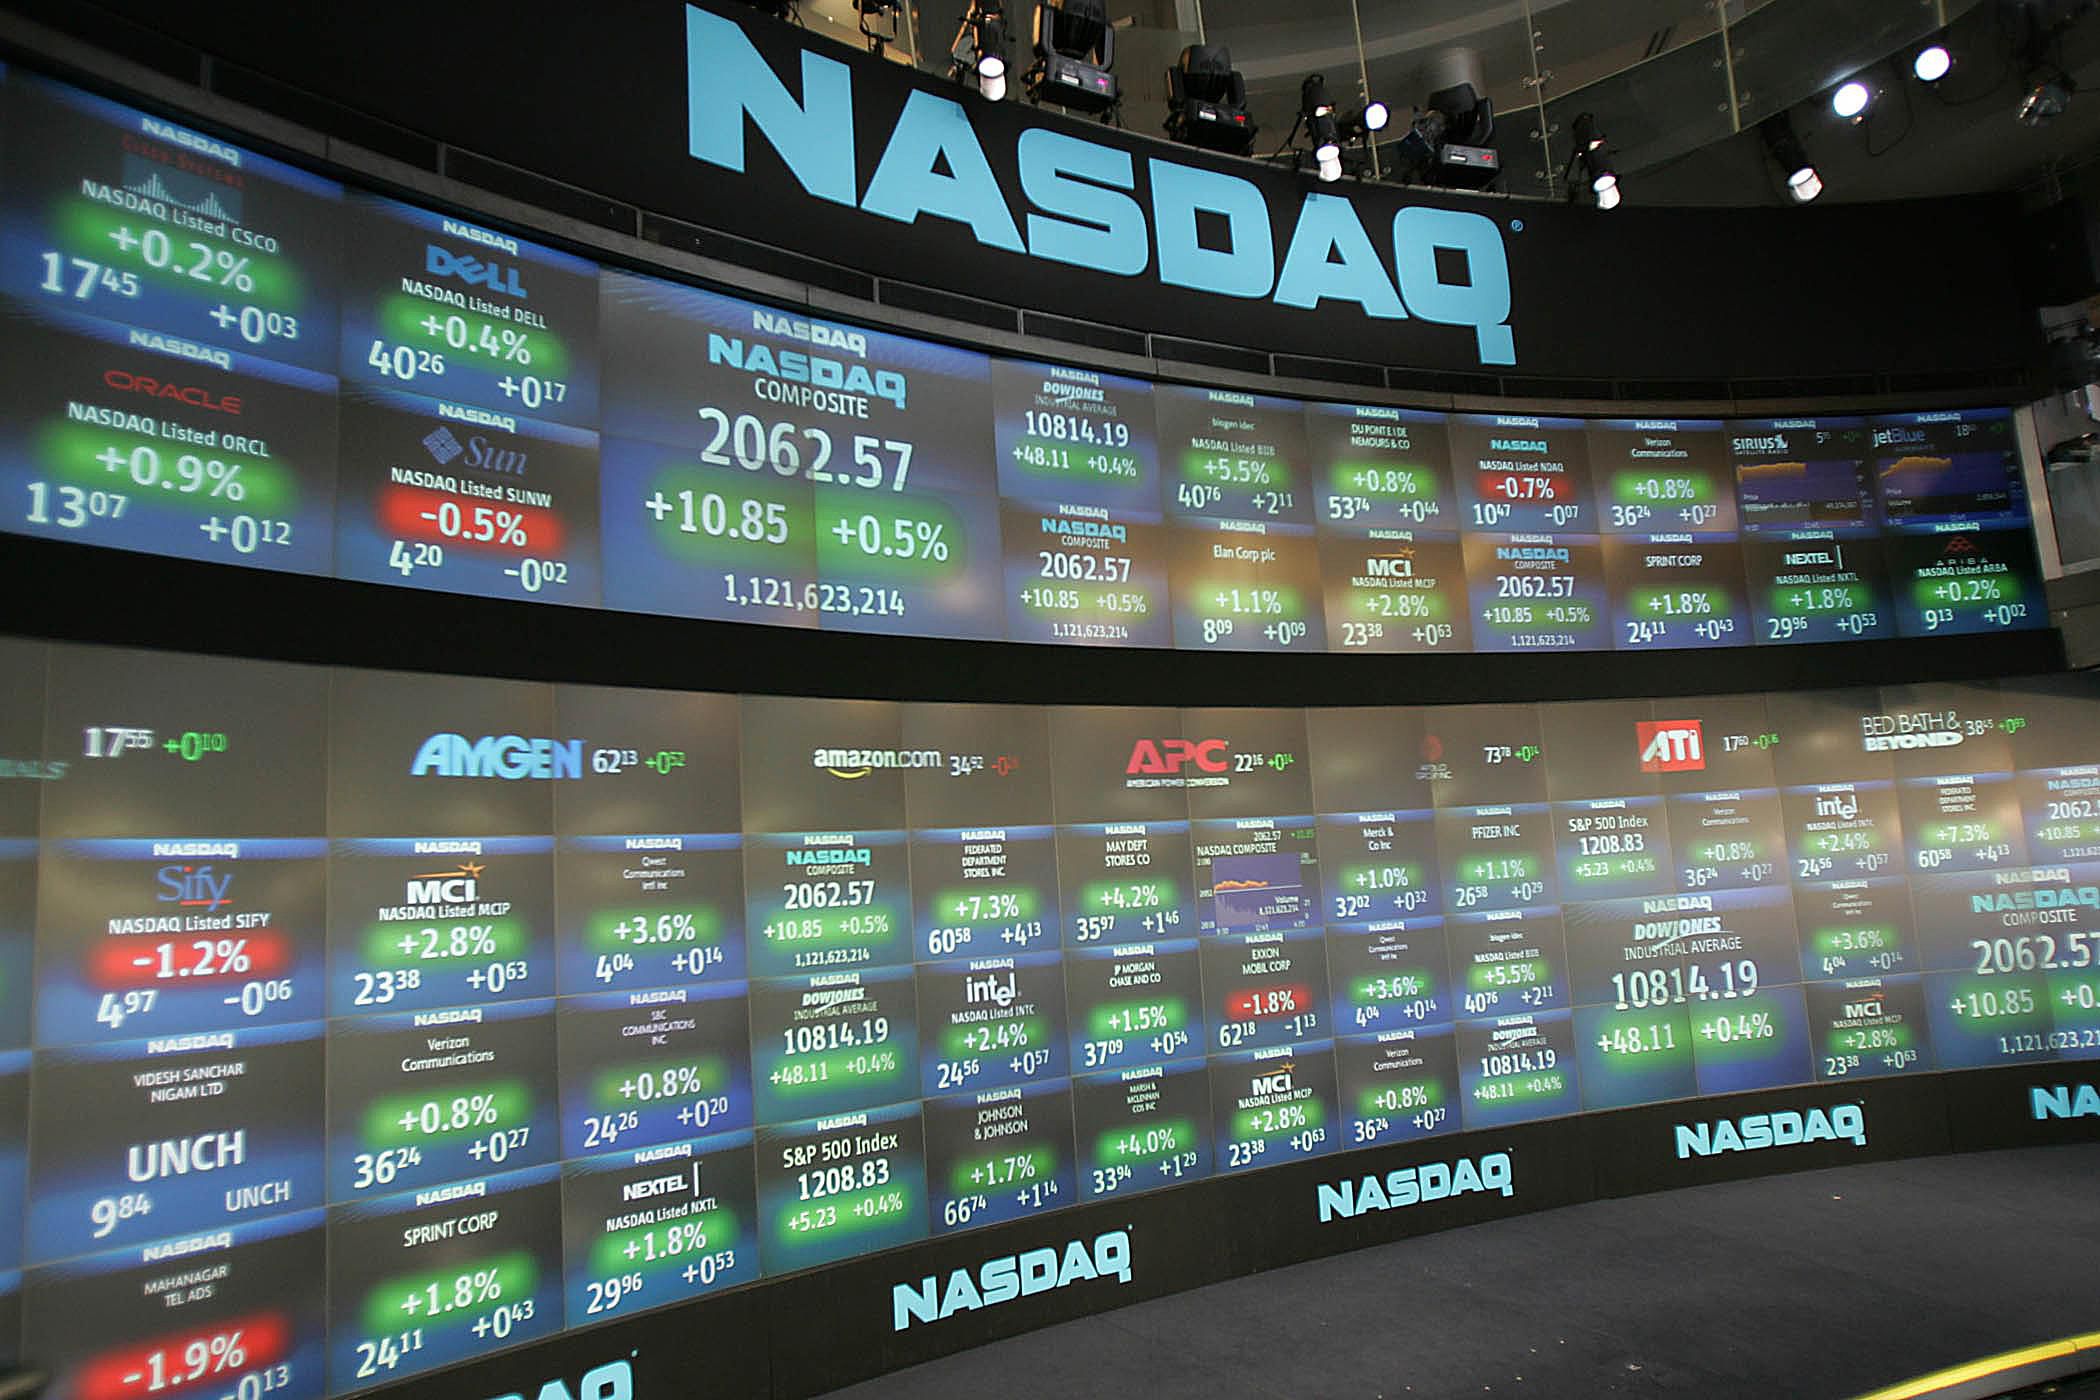 EXCLUSIVE: Nasdaq and Gemini Deepen Relationship, Nasdaq Moves Closer To Listing Coins | The ICO Journal